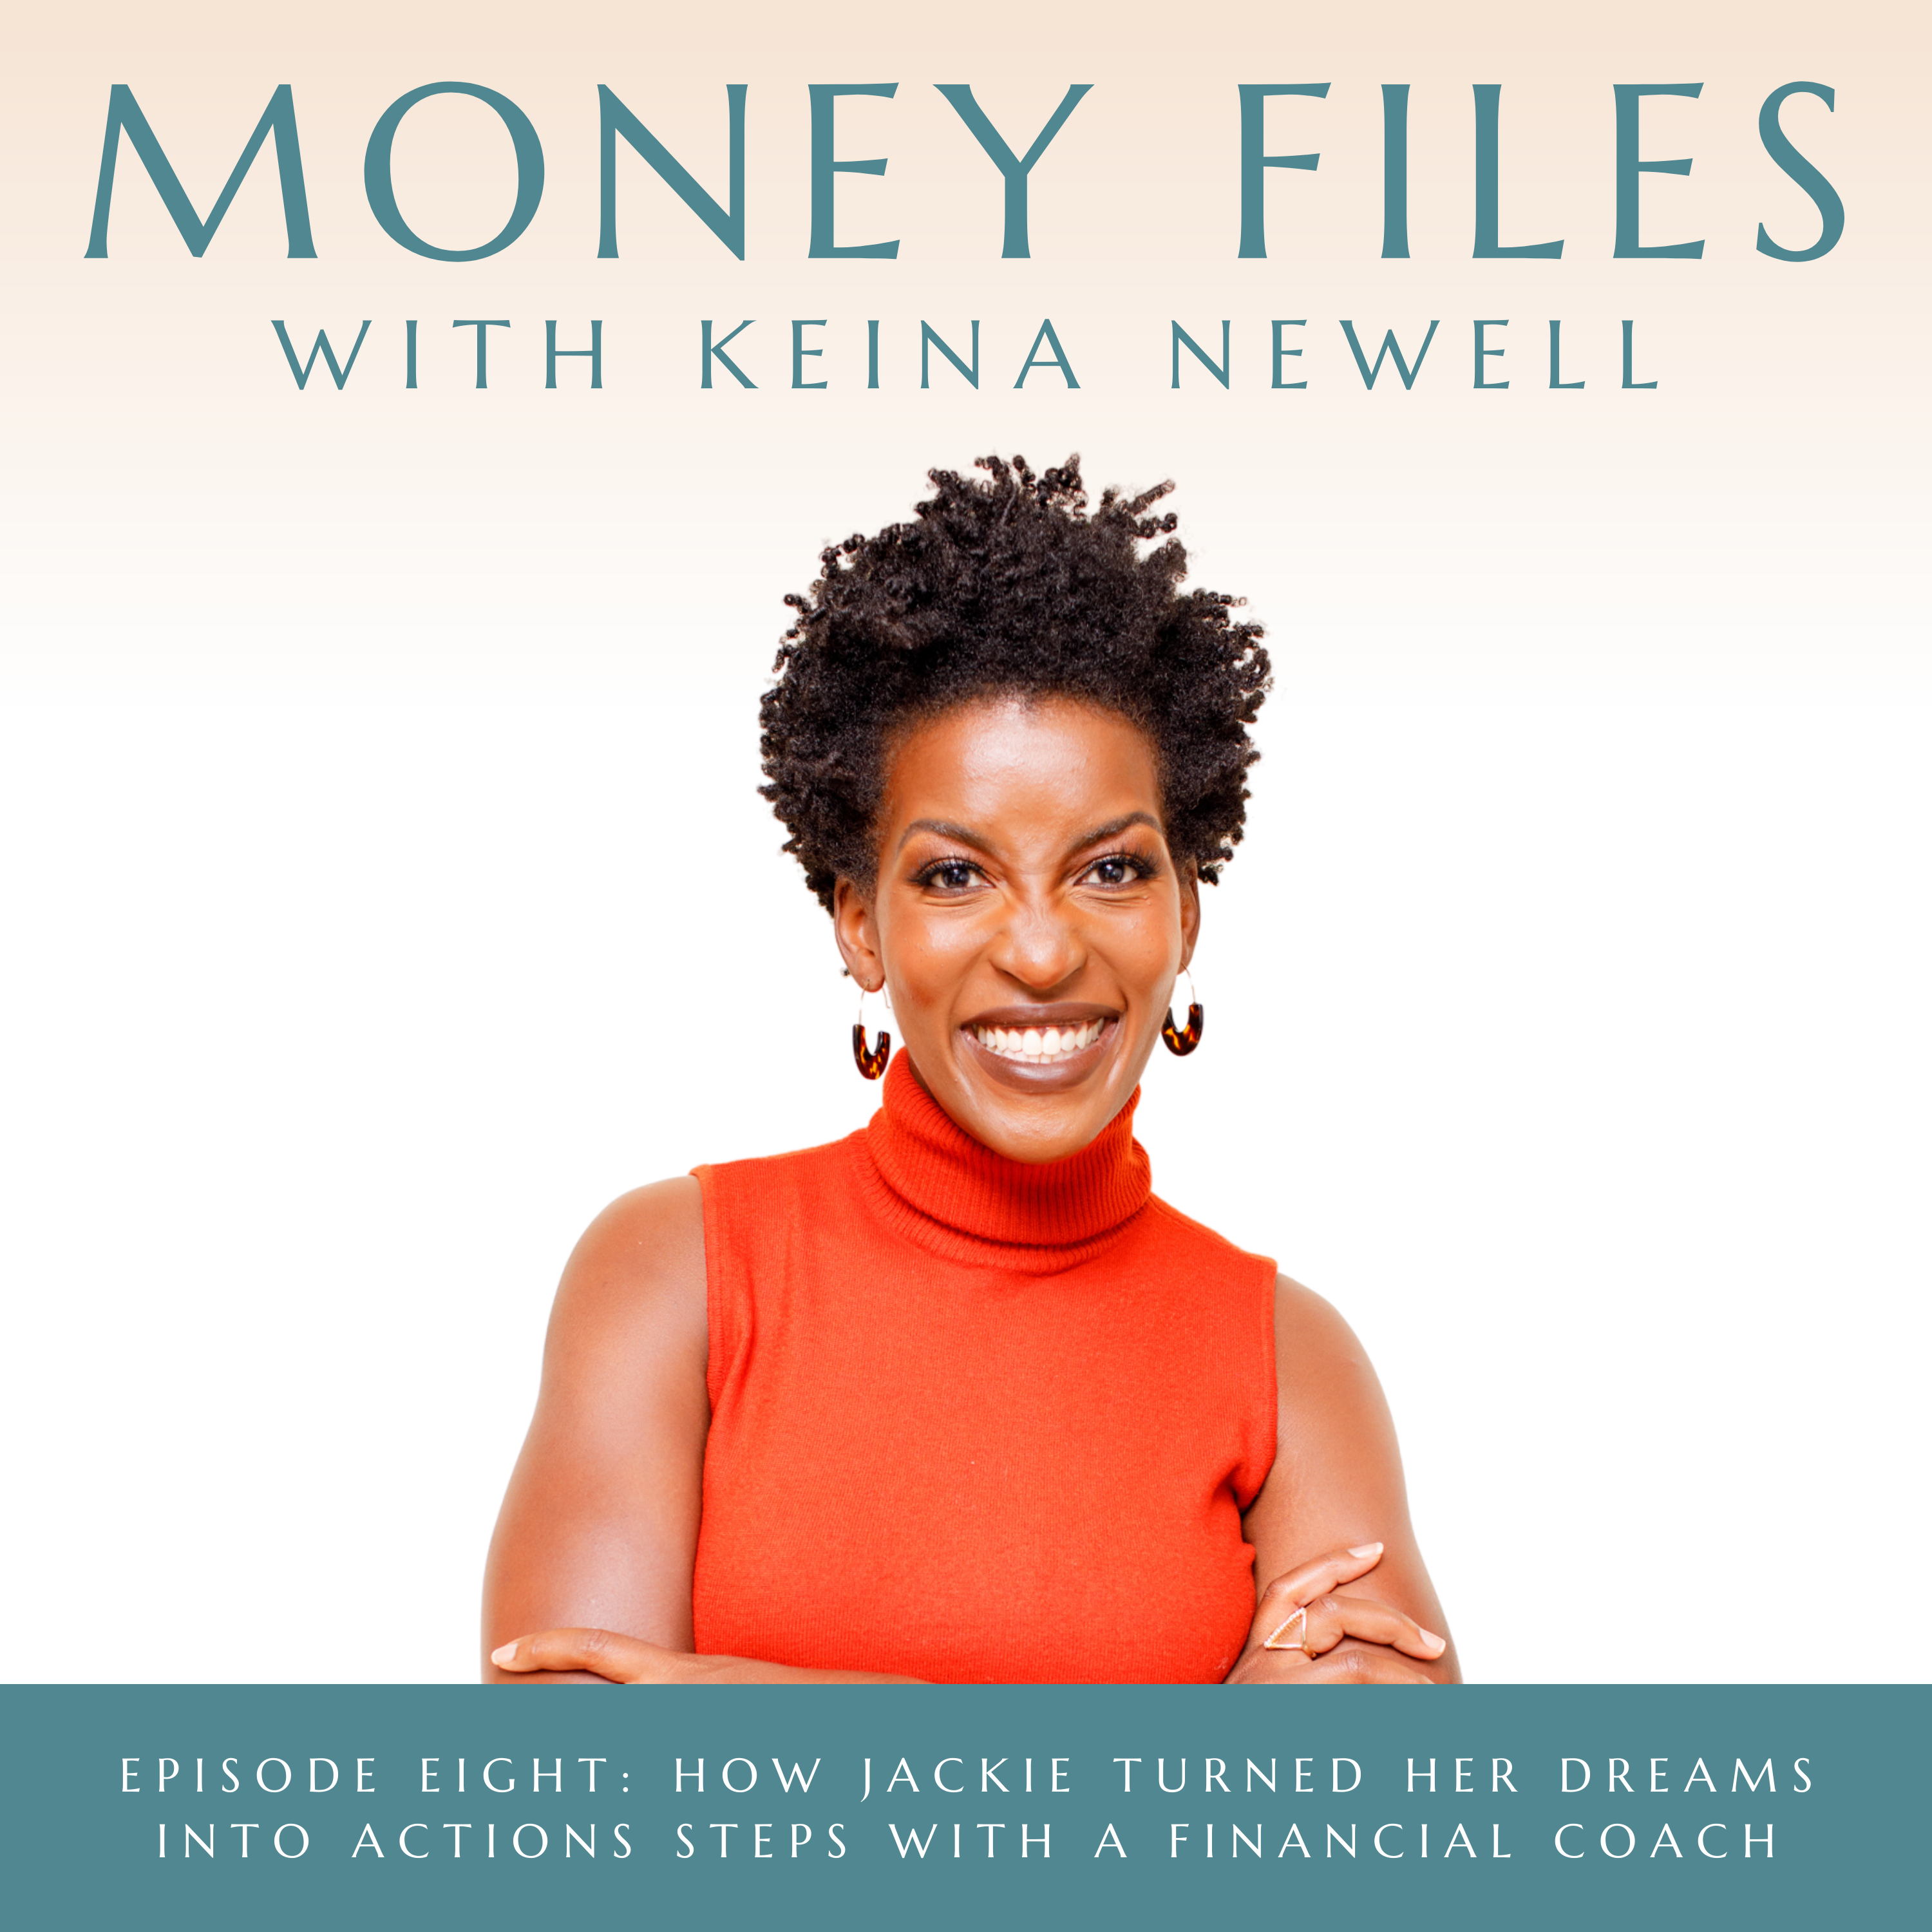 How Jackie Turned Her Dreams into Actions With a Financial Coach